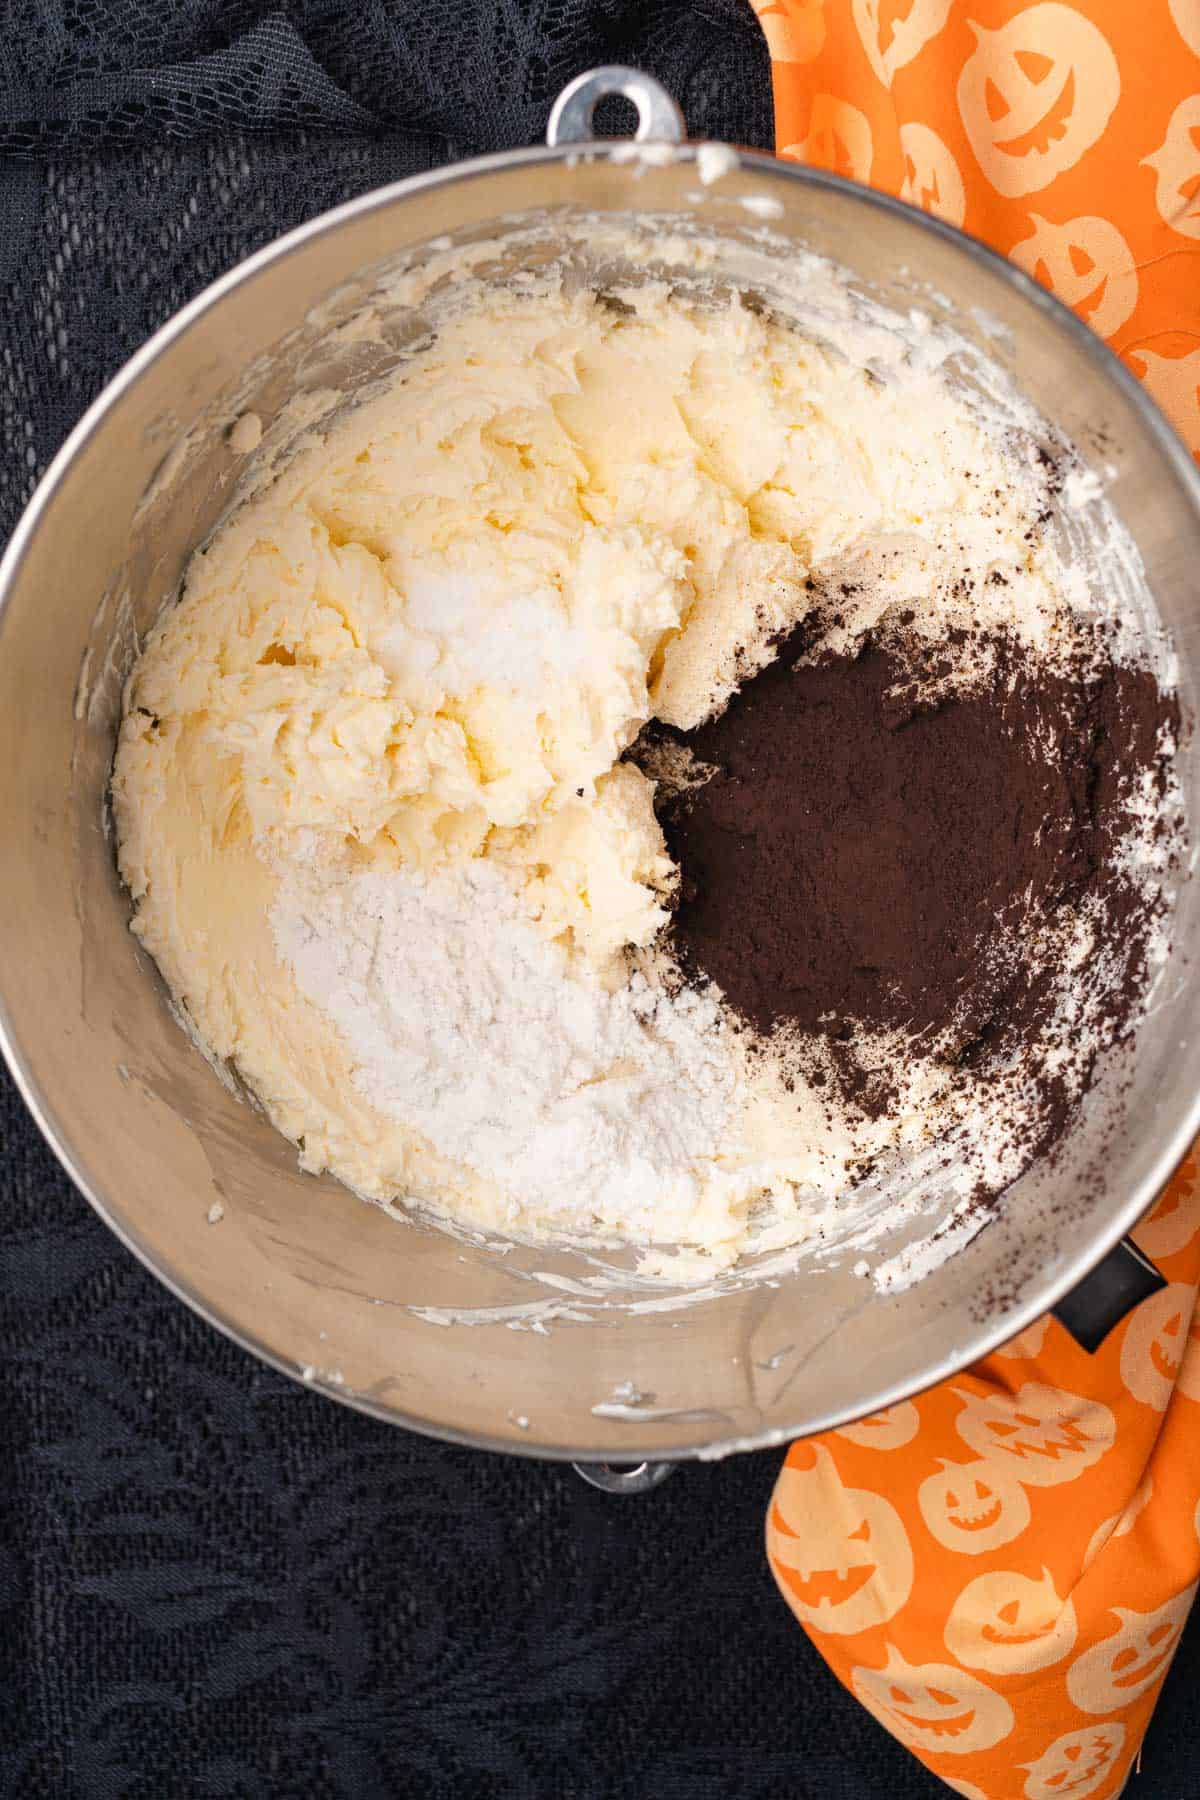 creamed butter, cream cheese, and black cocoa powder, powdered sweetener and kosher salt in a bowl